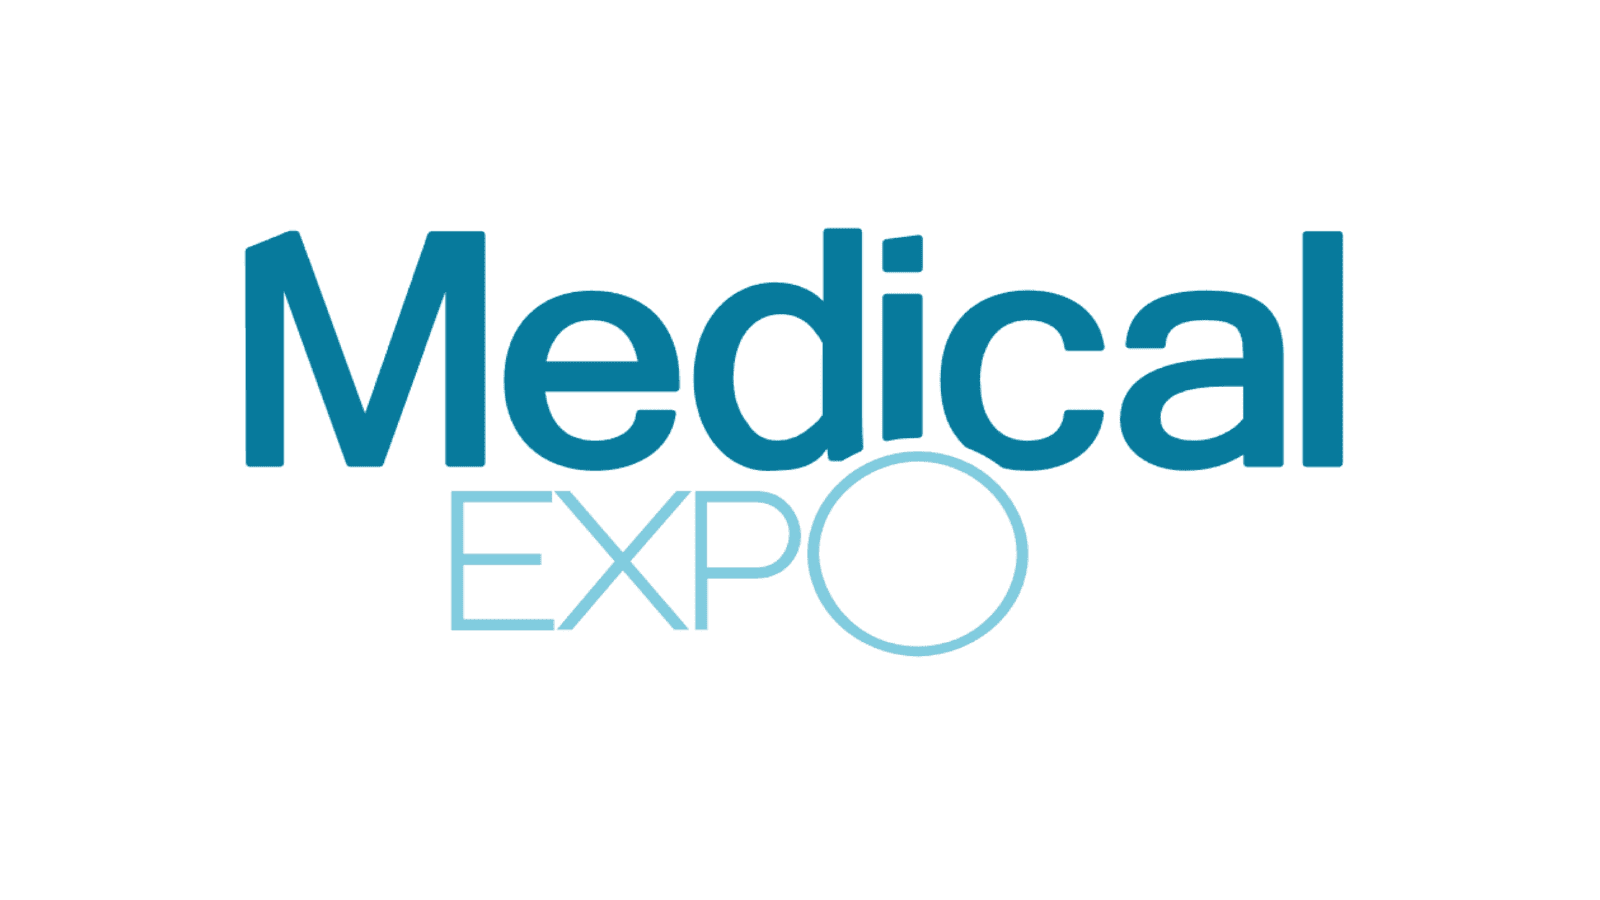 Medical expo